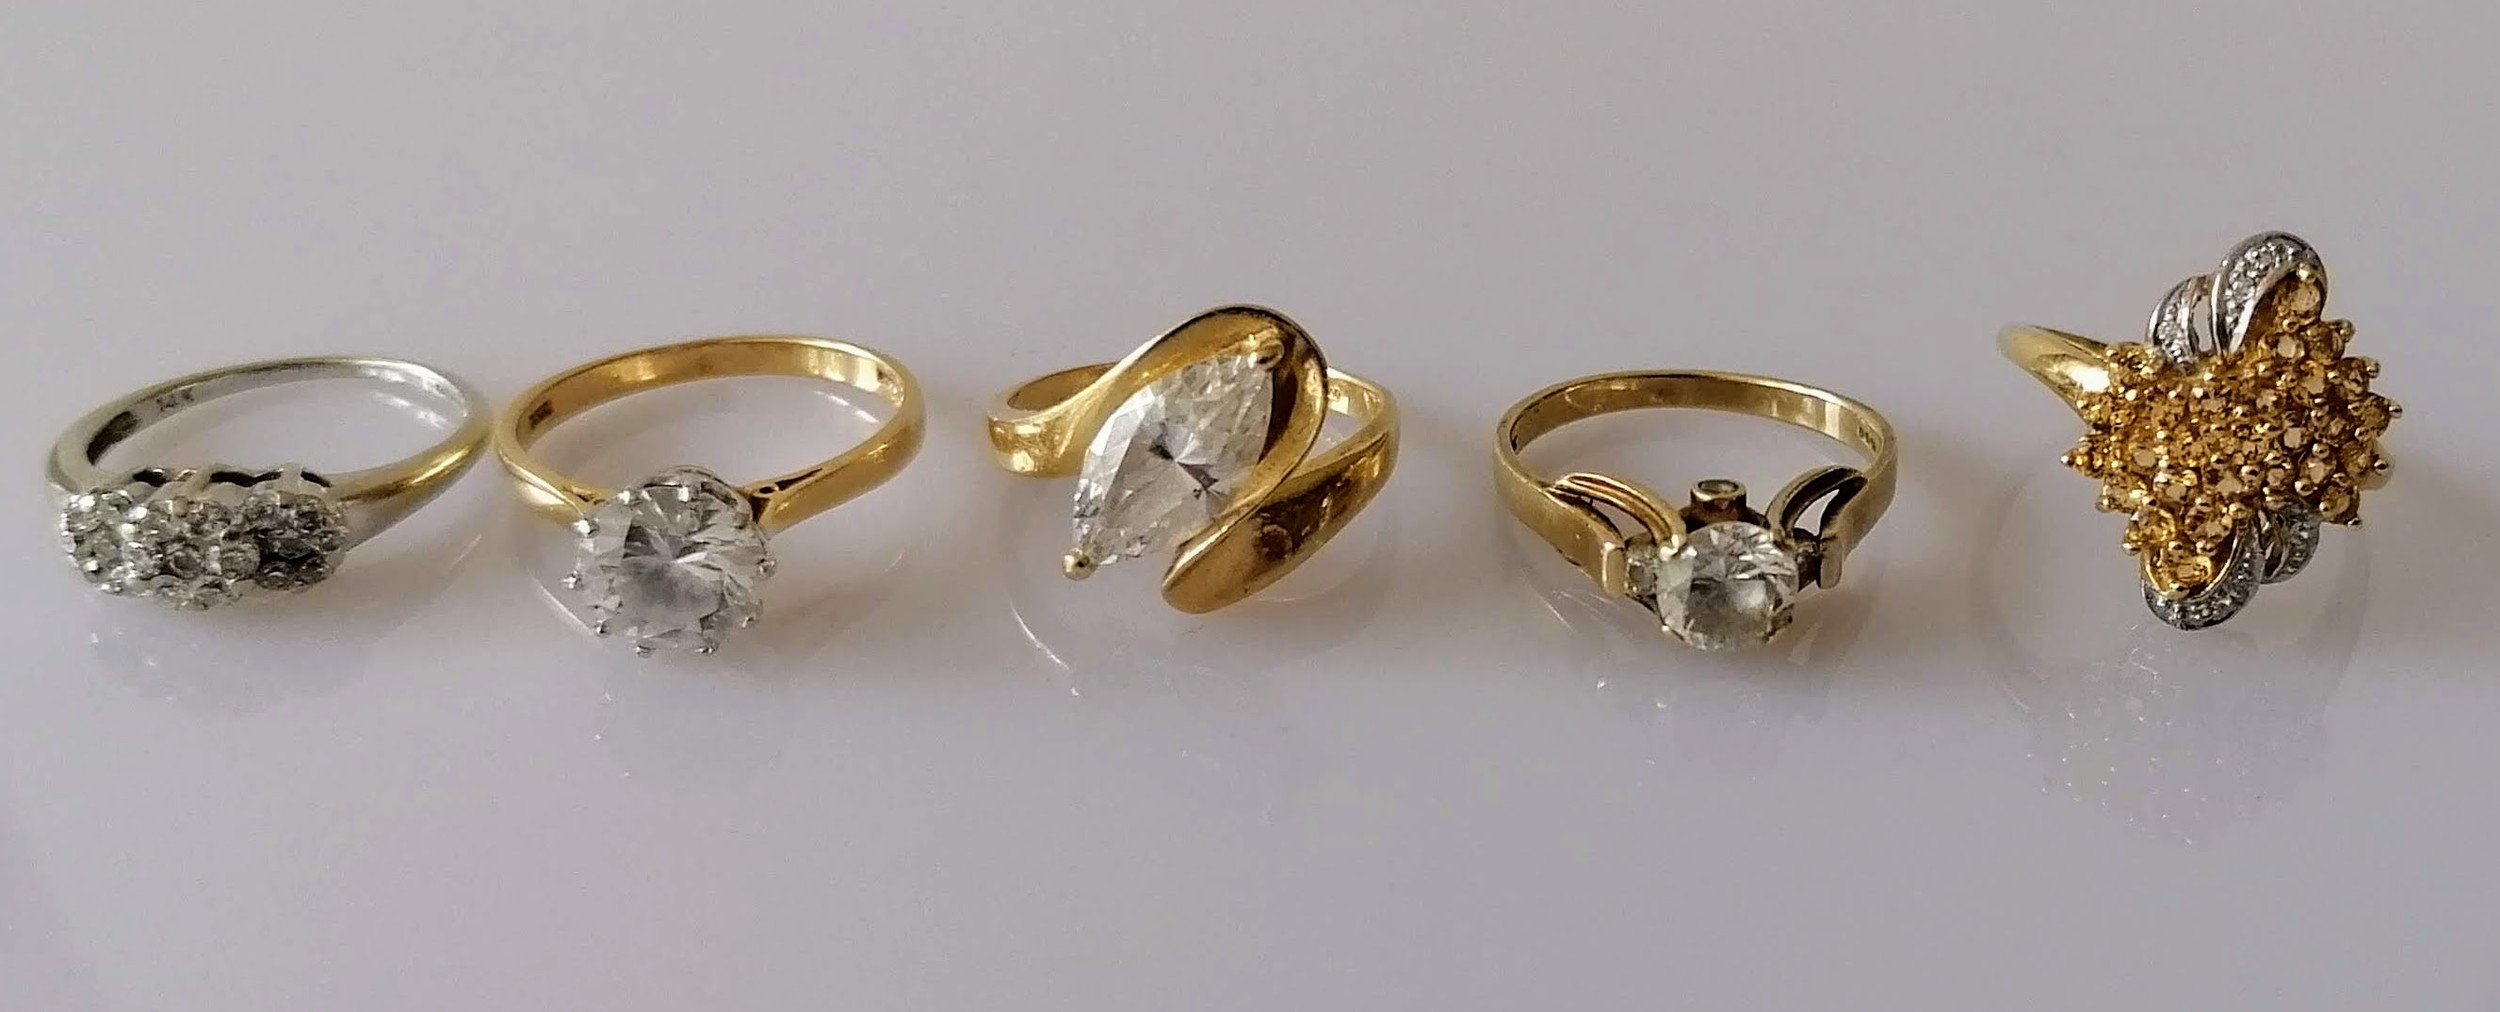 A three-cluster graduated diamond ring in a white gold claw setting; three gem-set yellow gold dress